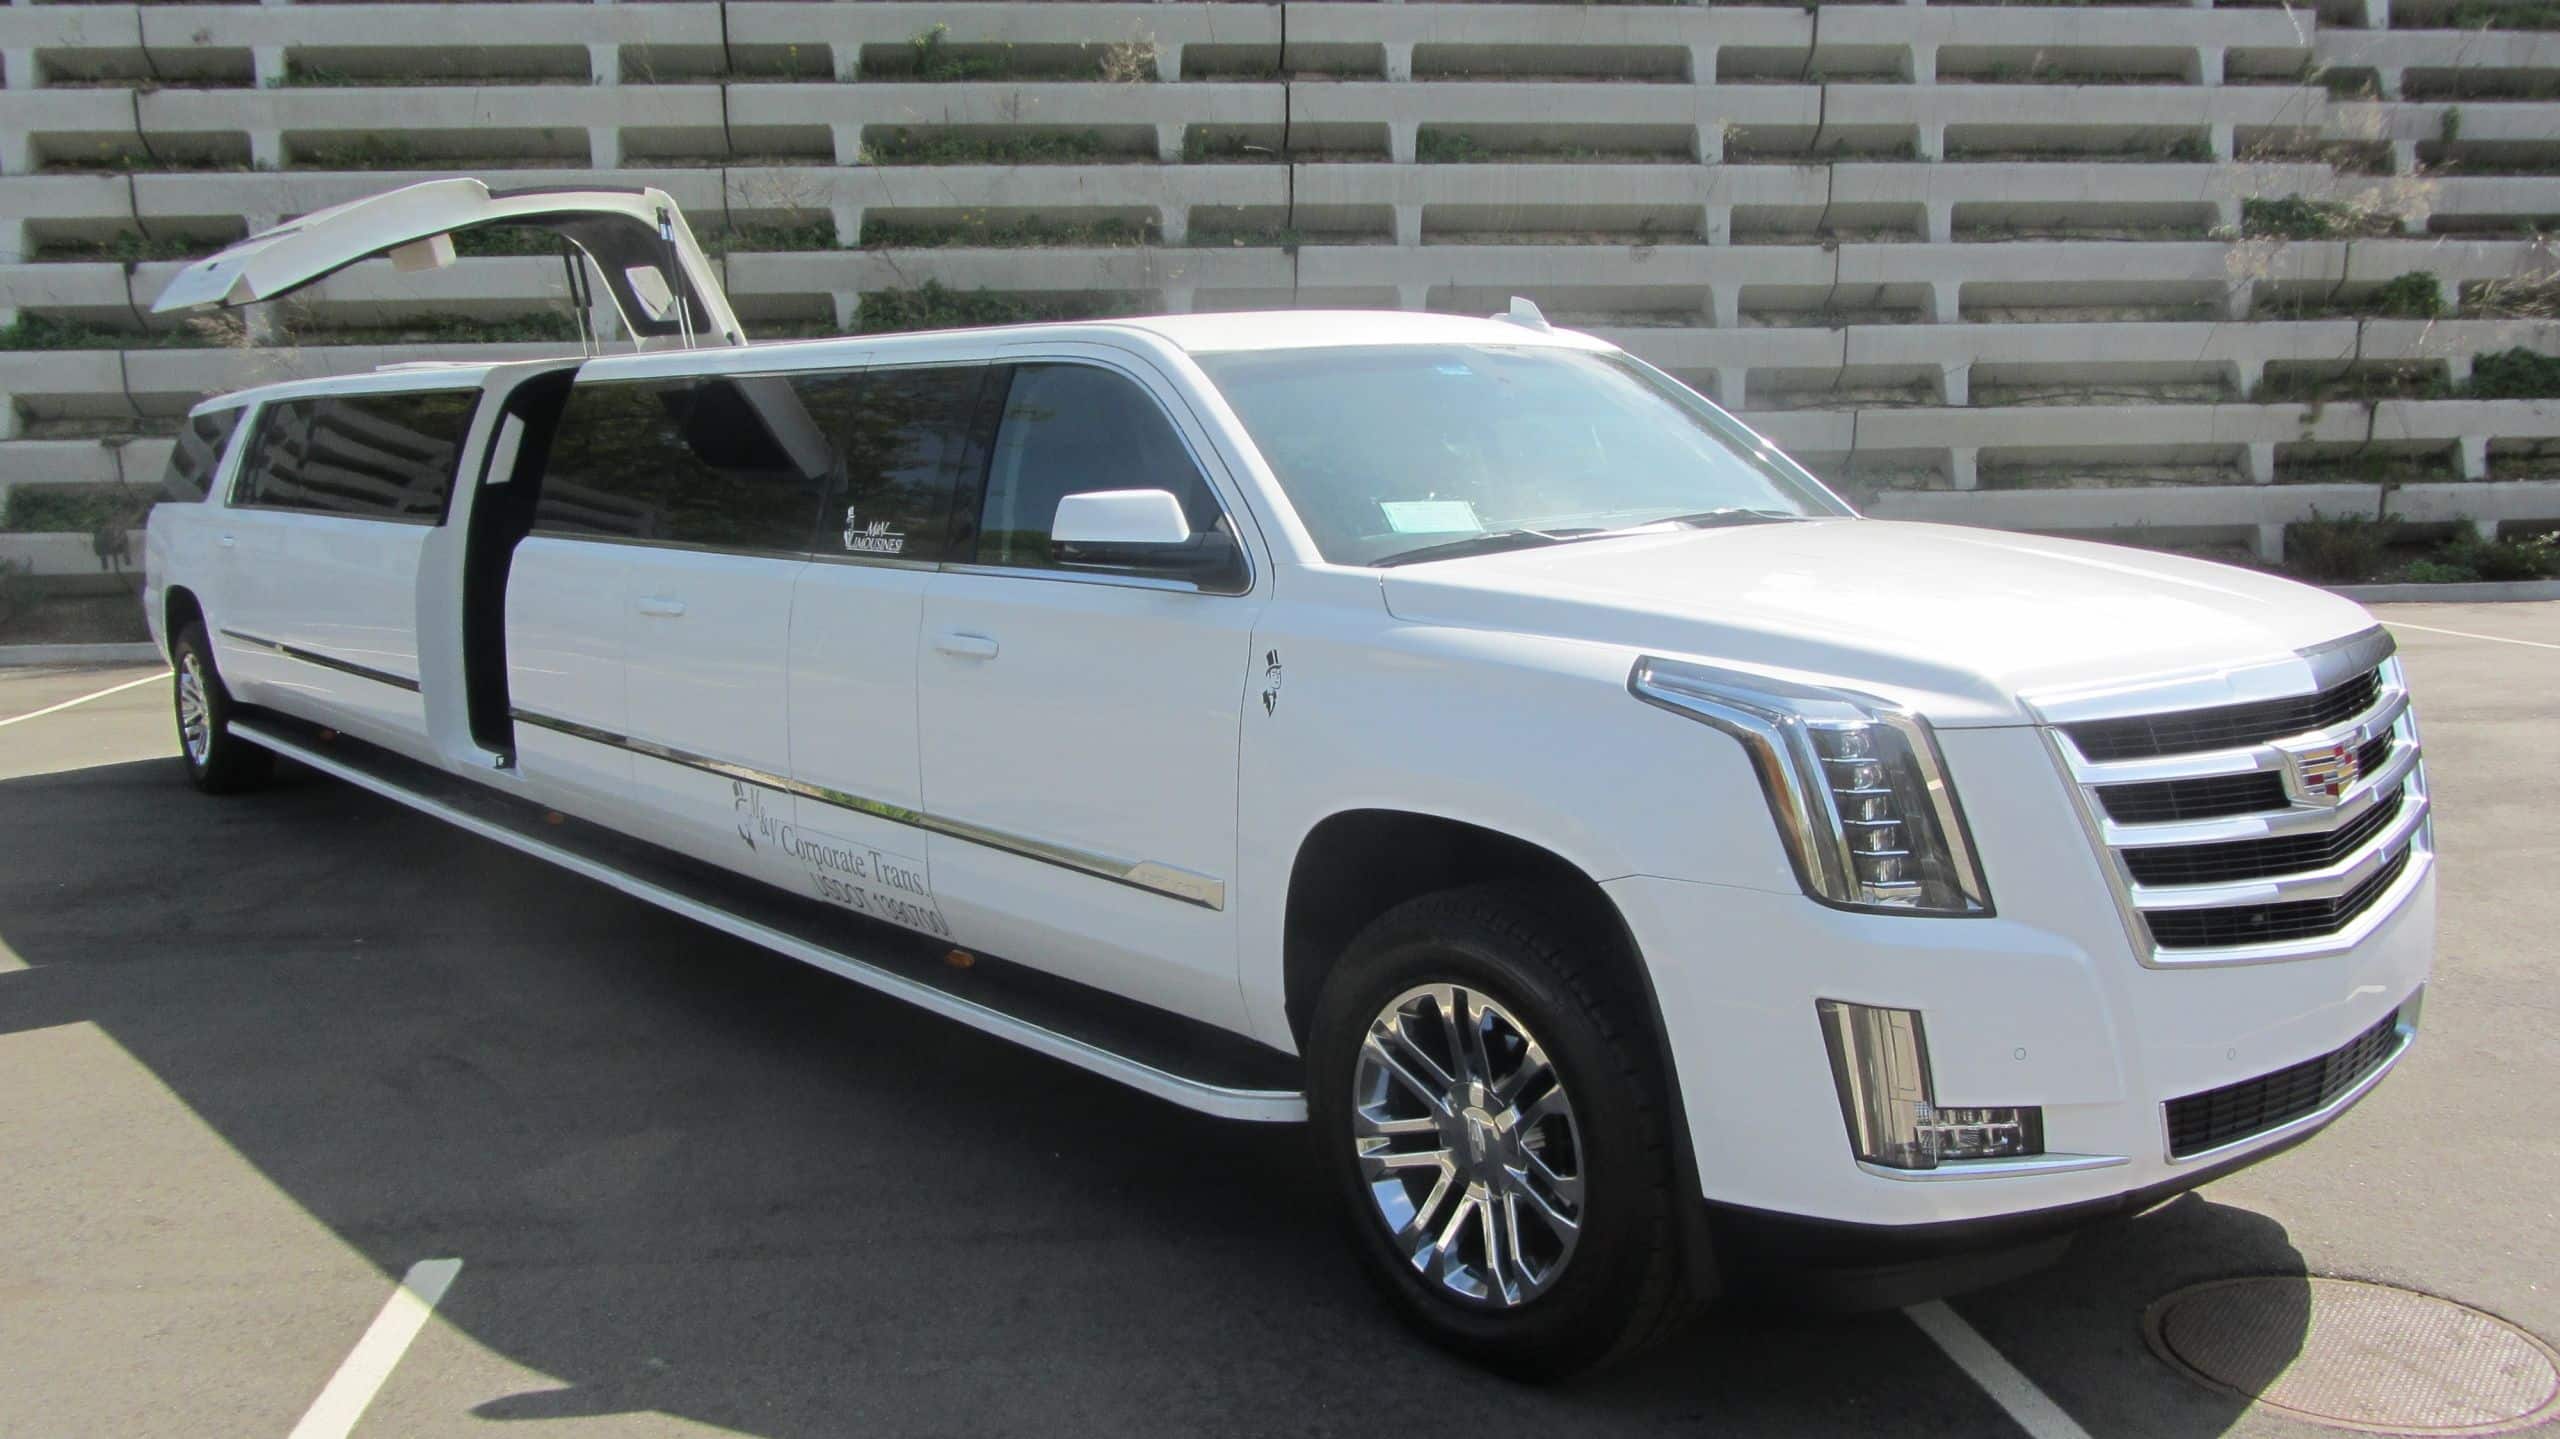 2016 Cadillac Escalade Limousine with Marble floors Jet and 5th door 21 passenger